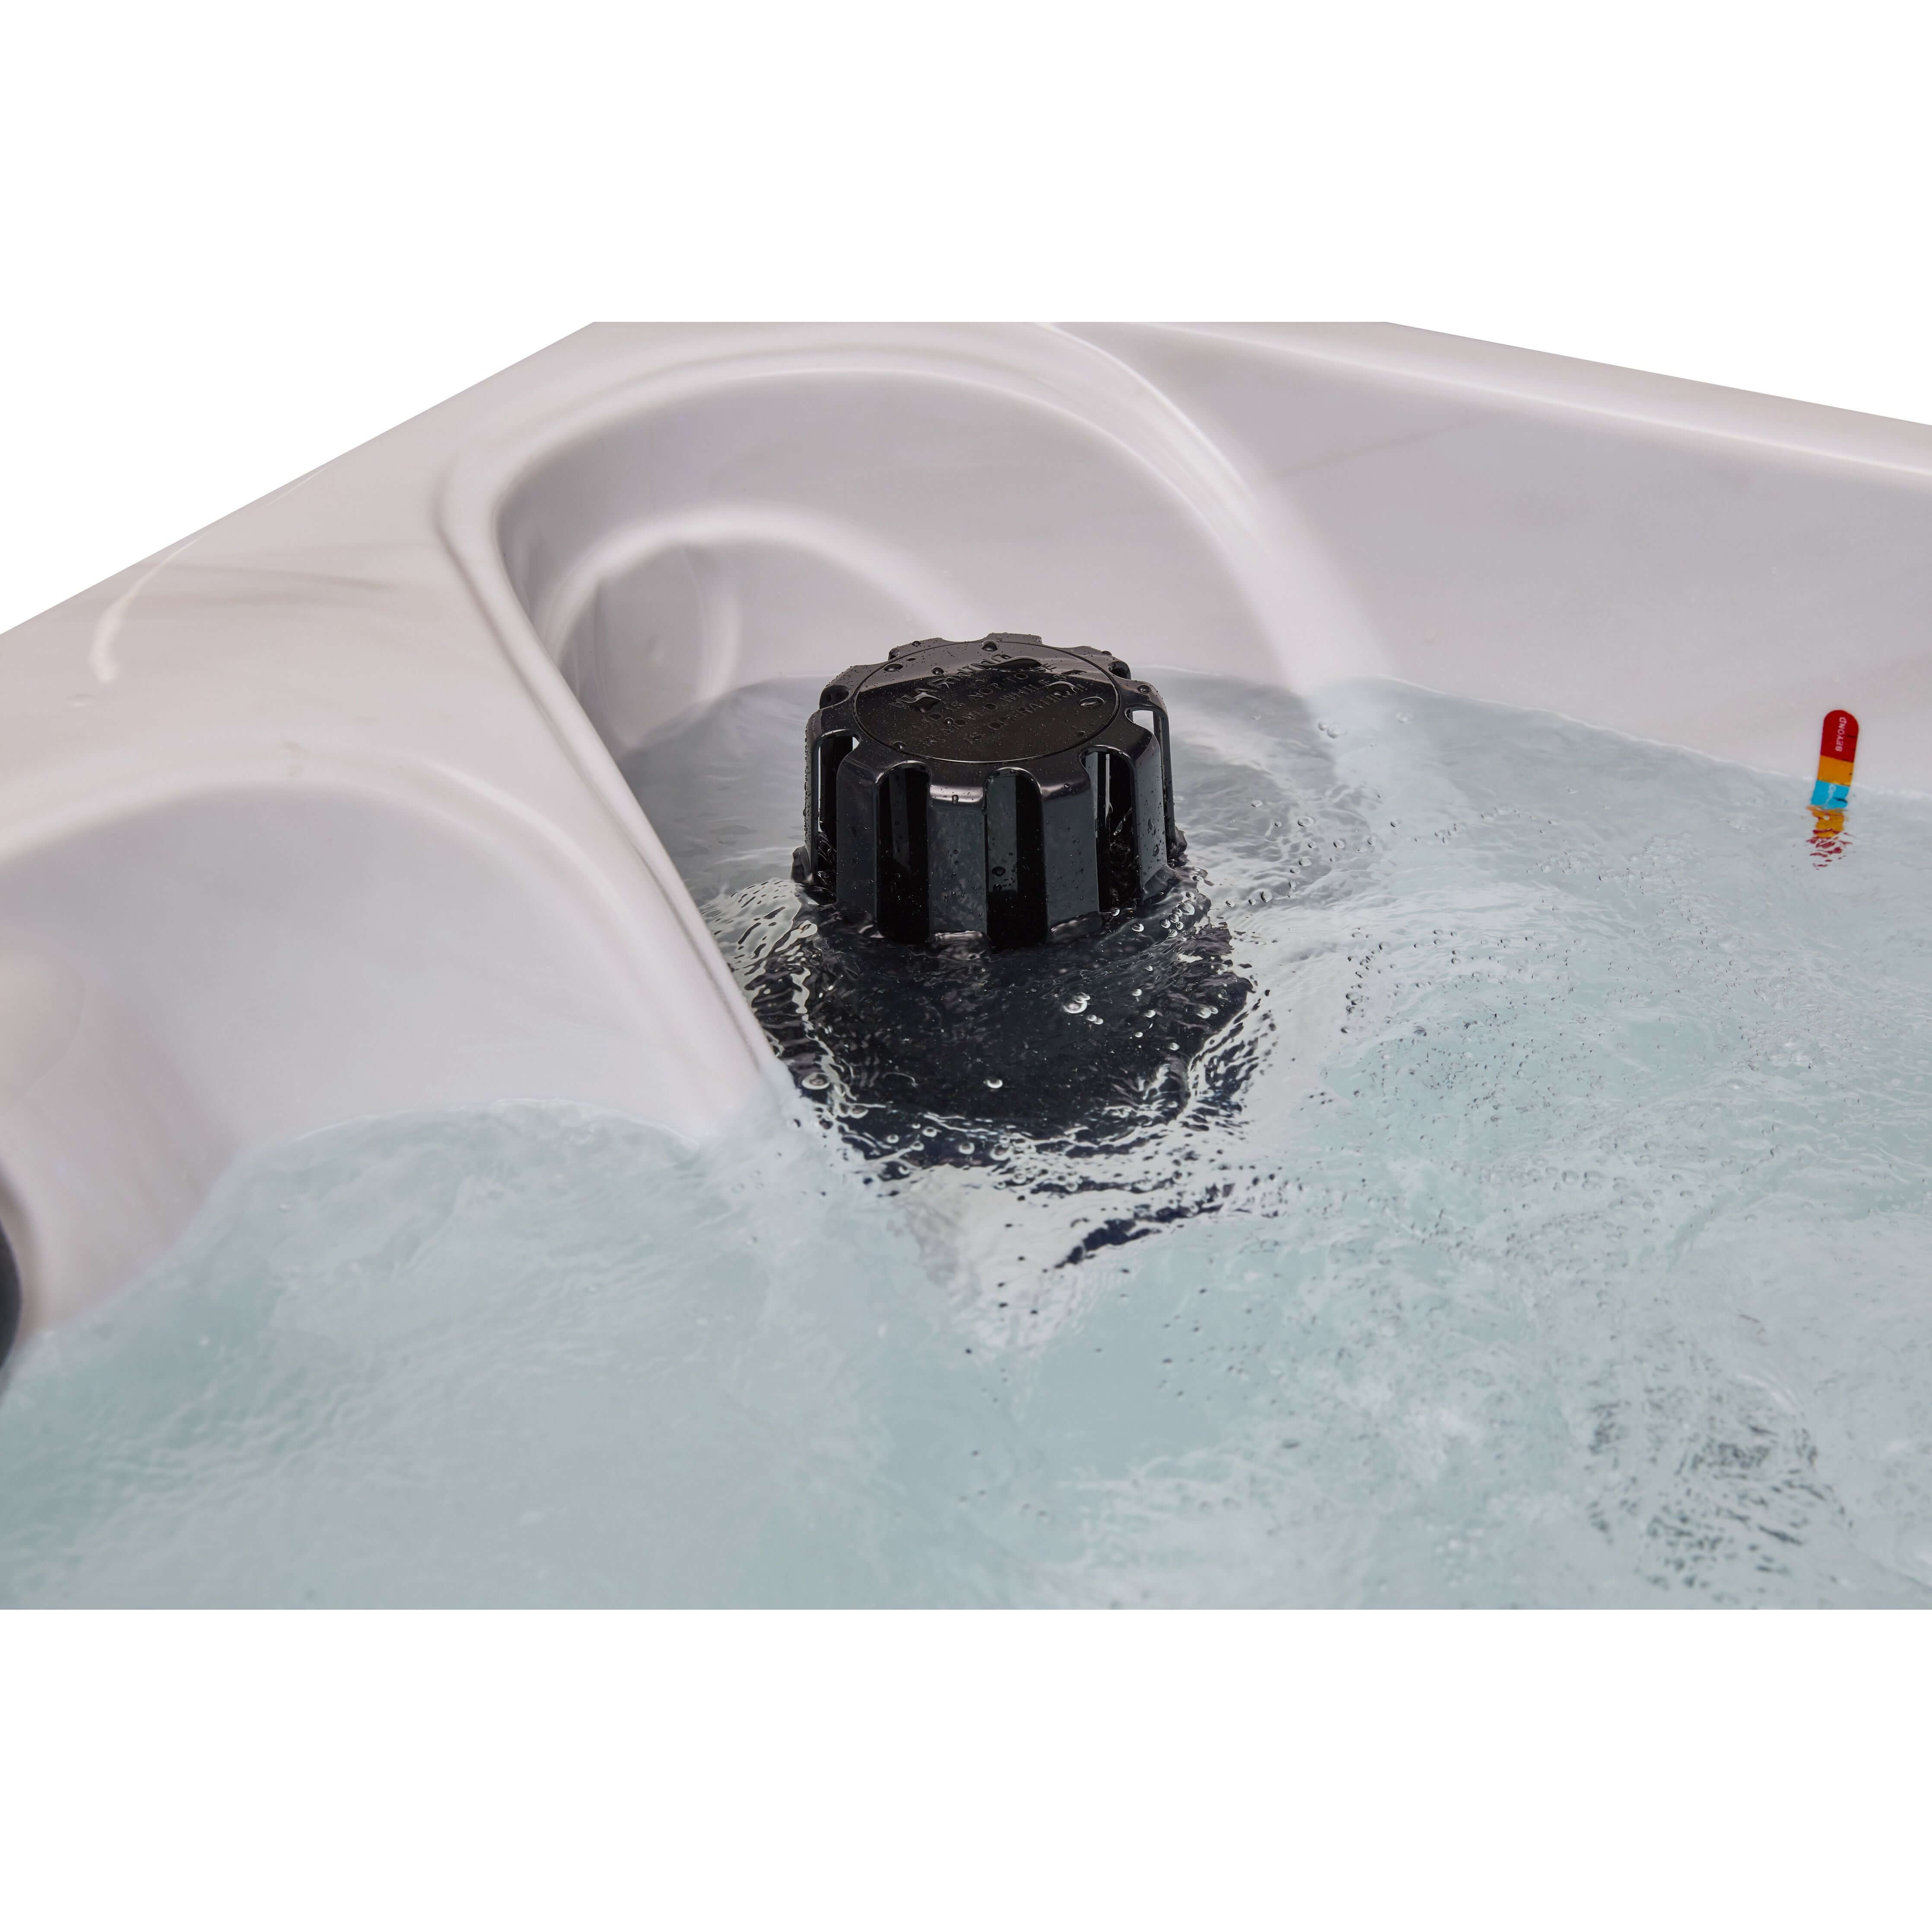 The CASHMERE 2-person Luxury Hot Tub